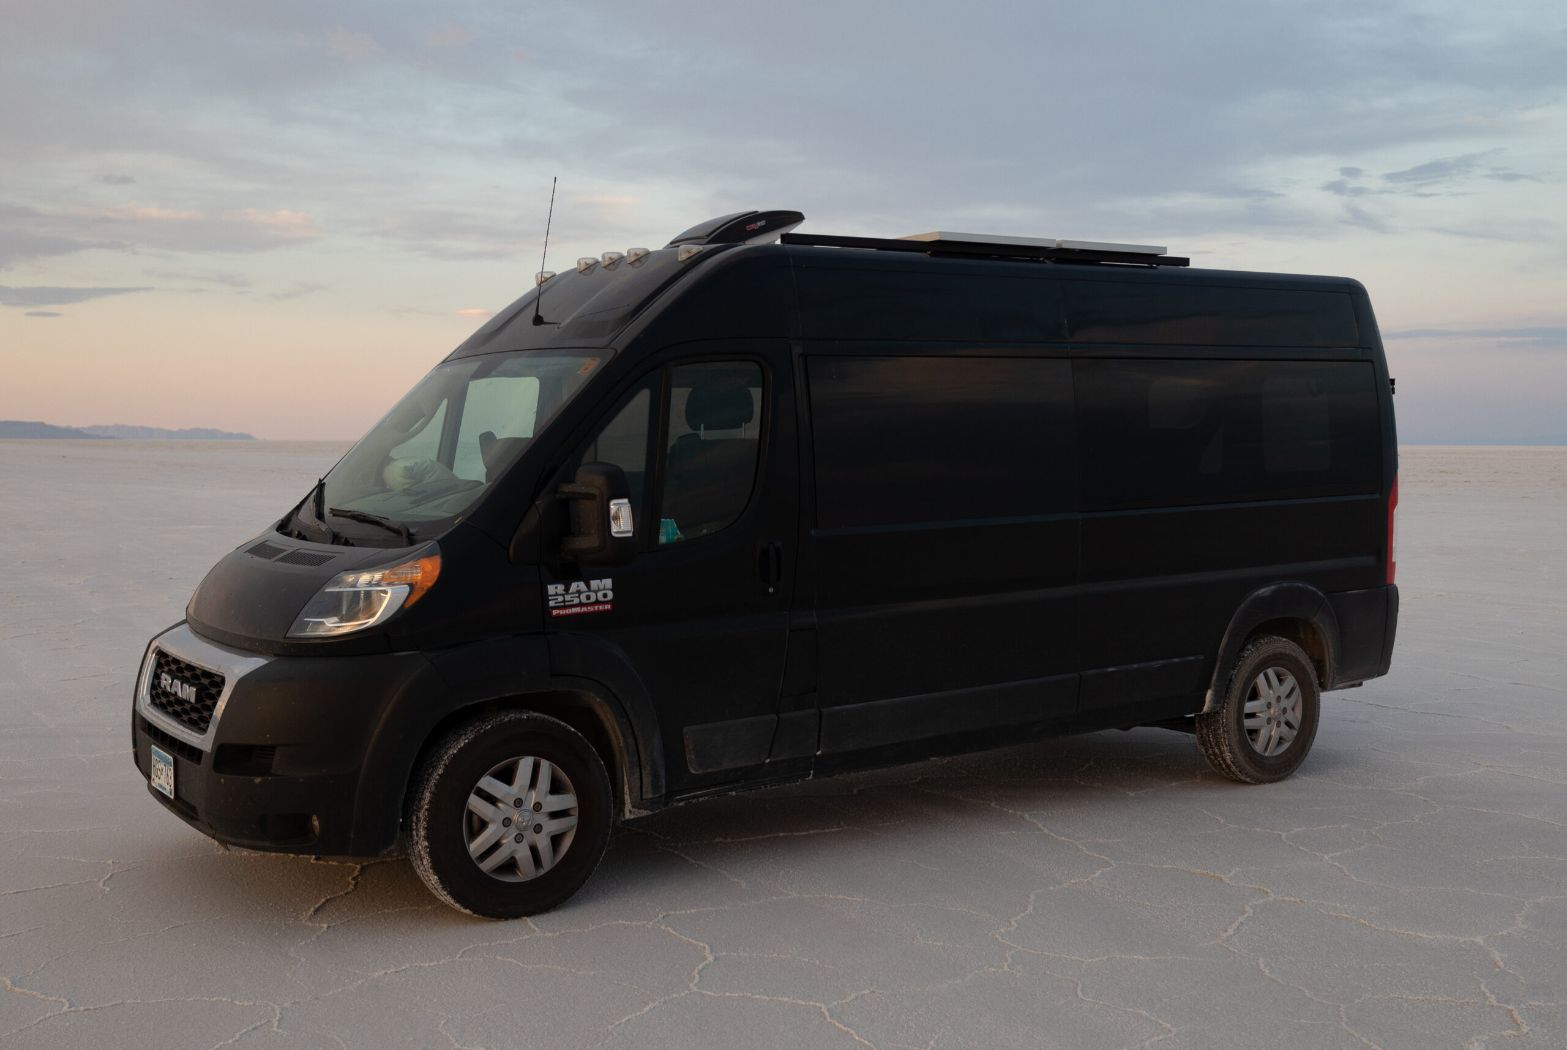 This $115K Ram Promaster Van Conversion Comes With a Massive Skylight and  Modern Design - autoevolution